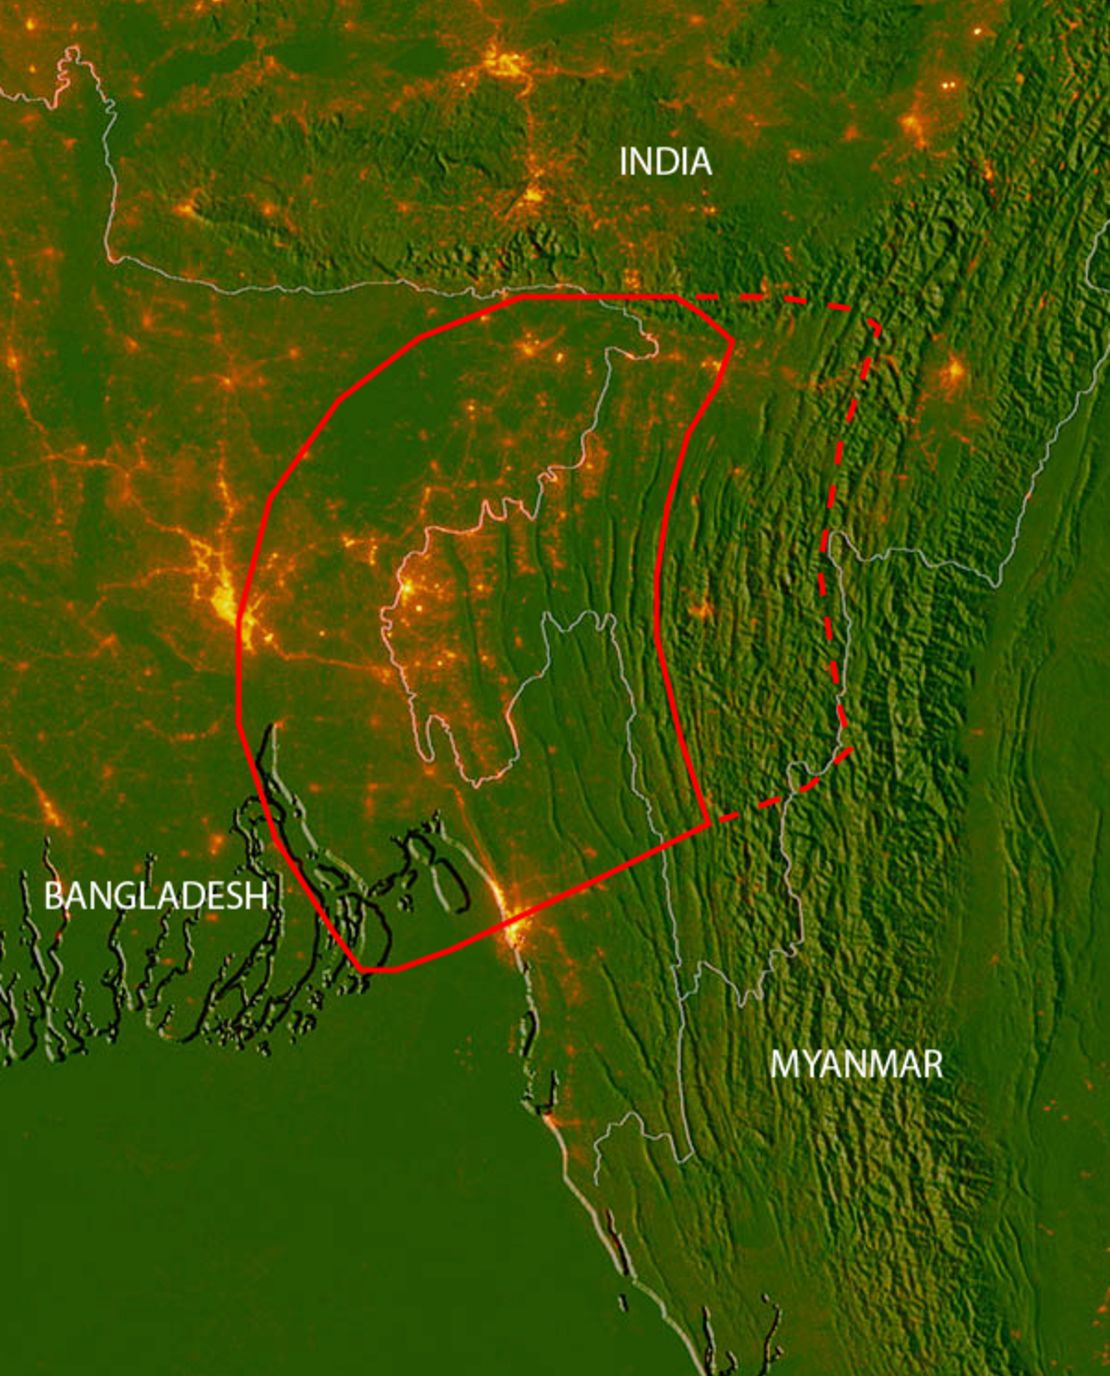 This map shows the position of the hidden fault lines in red. The base map includes city lights to show the location of major population centers. 